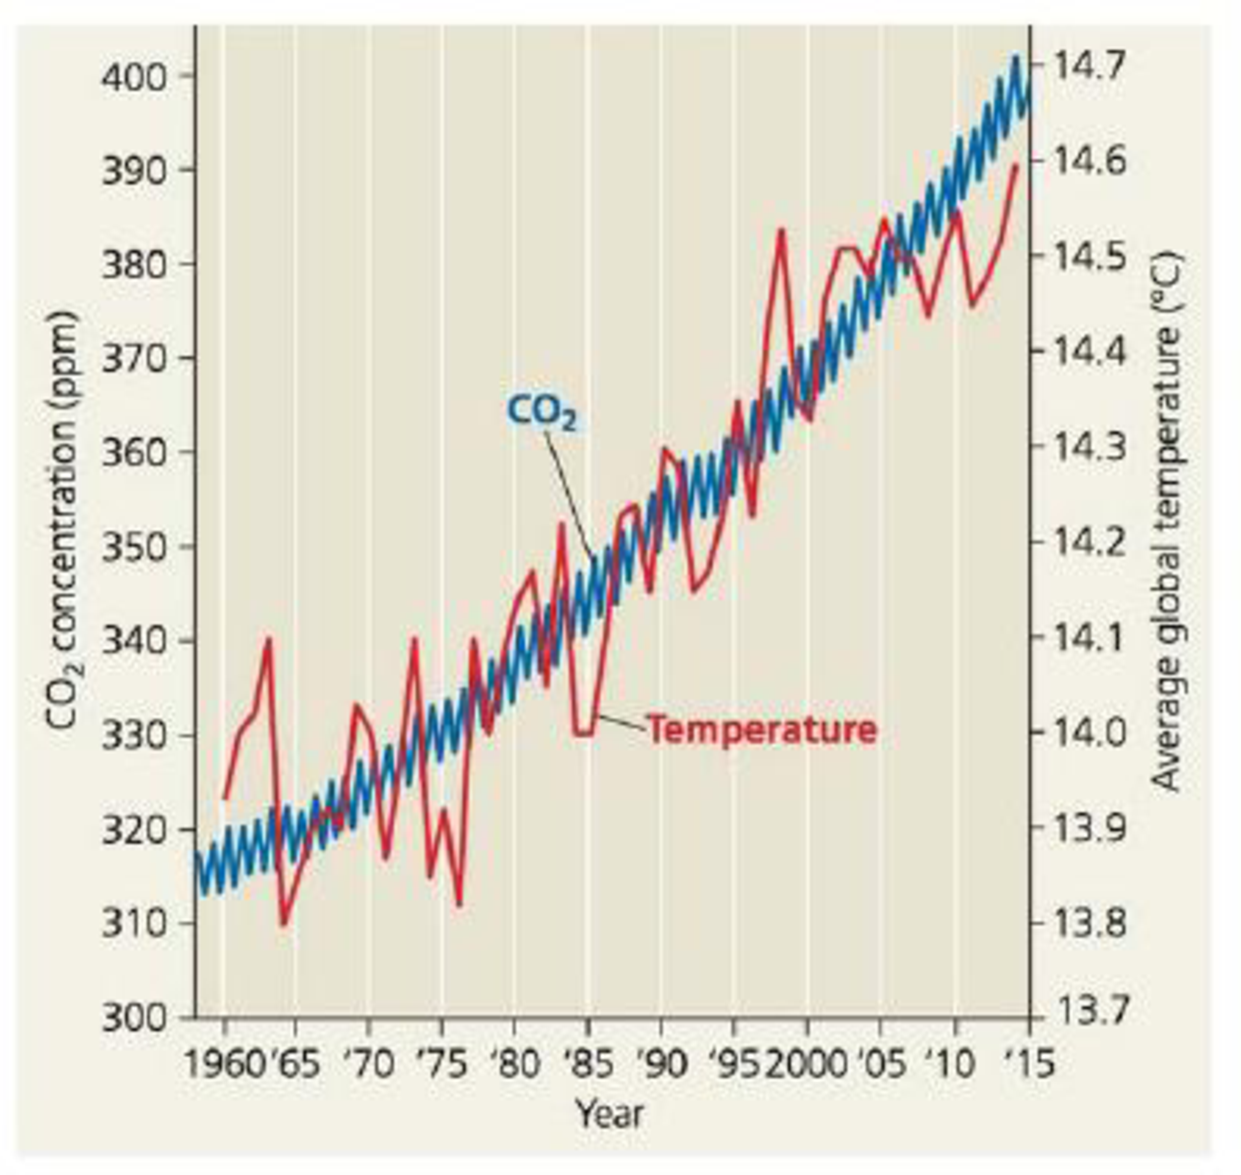 Chapter 56, Problem 9TYU, SCIENTIFIC INQUIRY (a) Estimate the average CO2. concentration in 1975 and in 2012 using data 